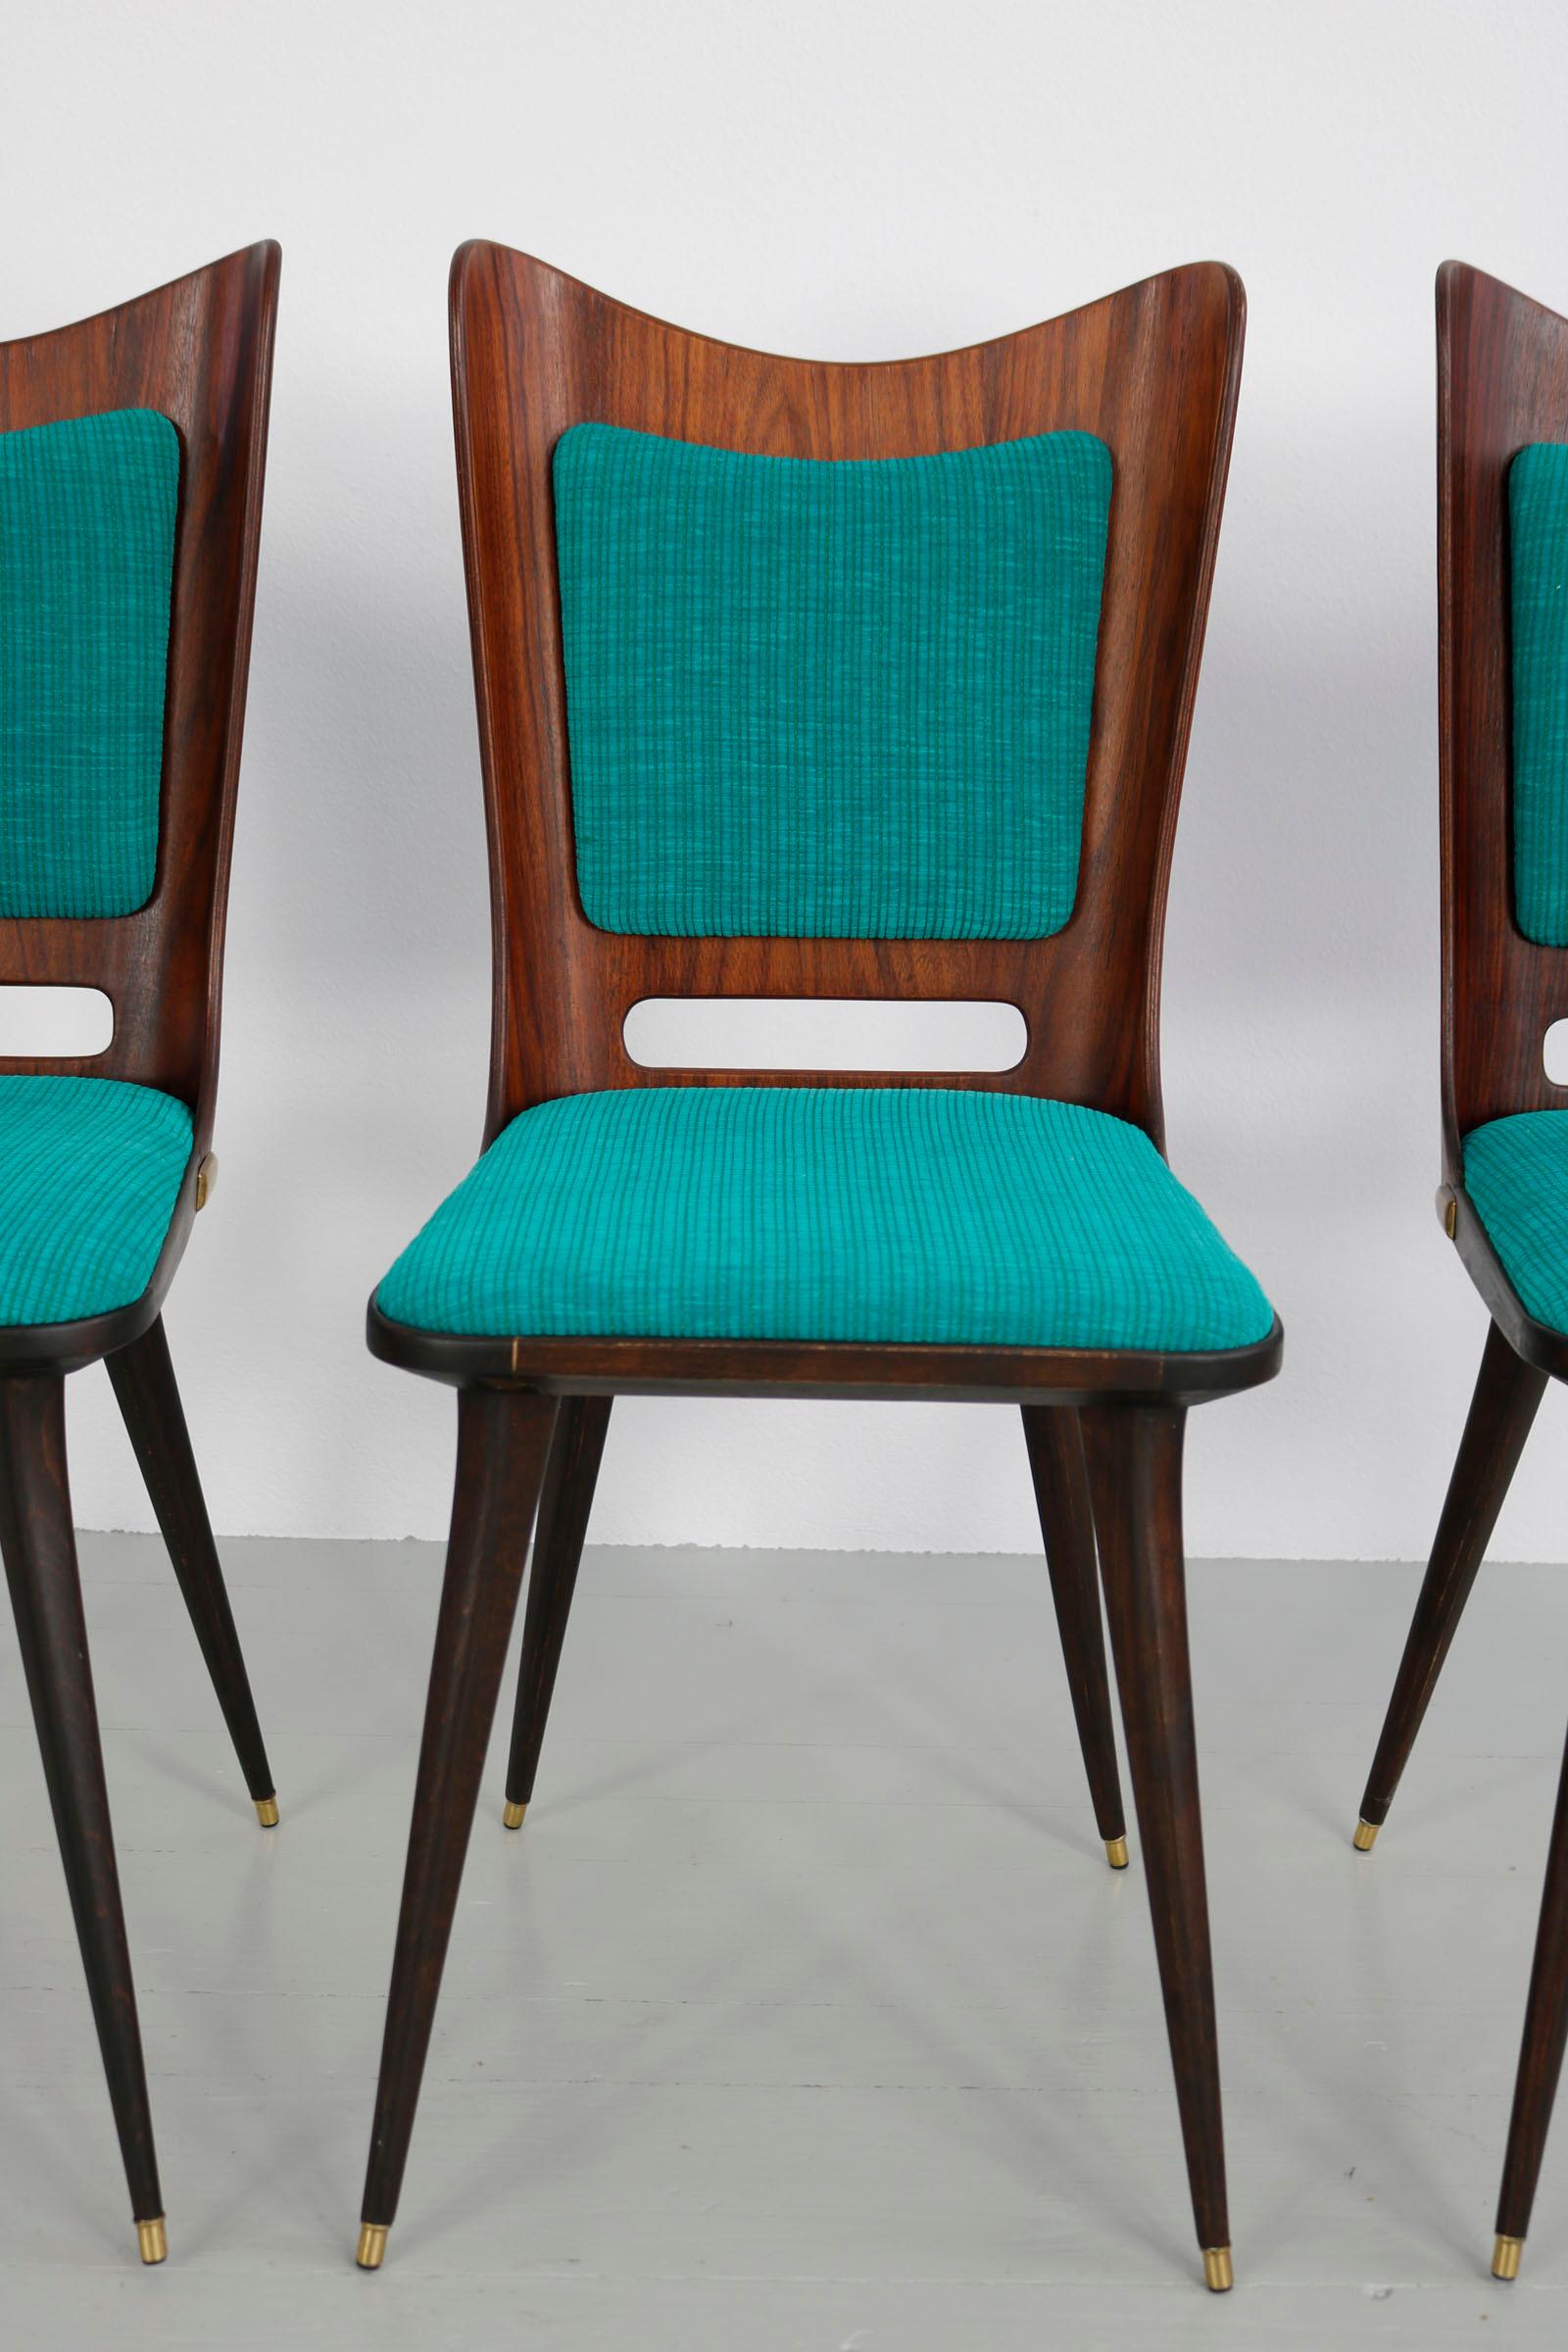 Set of Six Wooden Dining Chairs with Green Upholstery, 1950s For Sale 8